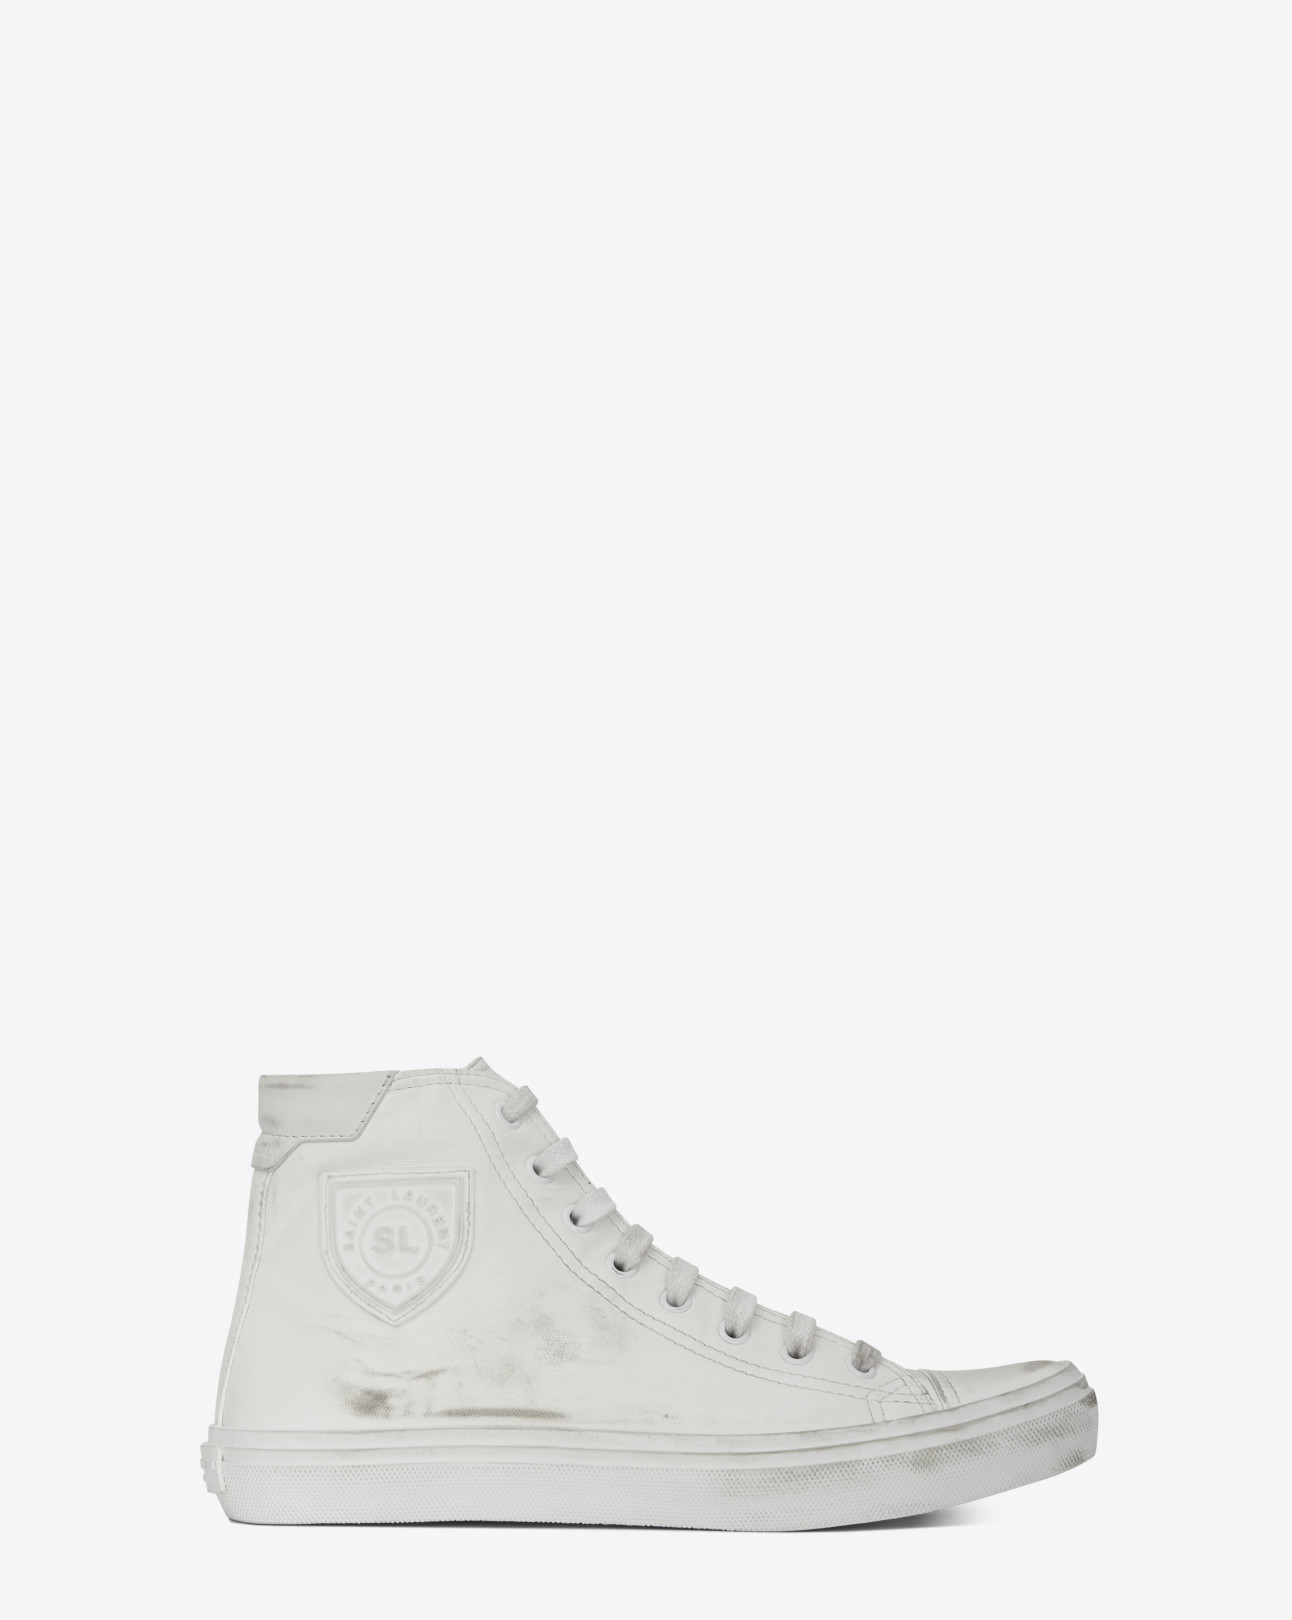 BEDFORD MID TOP SNEAKER IN WHITE USED EFFECT LEATHER 10万円